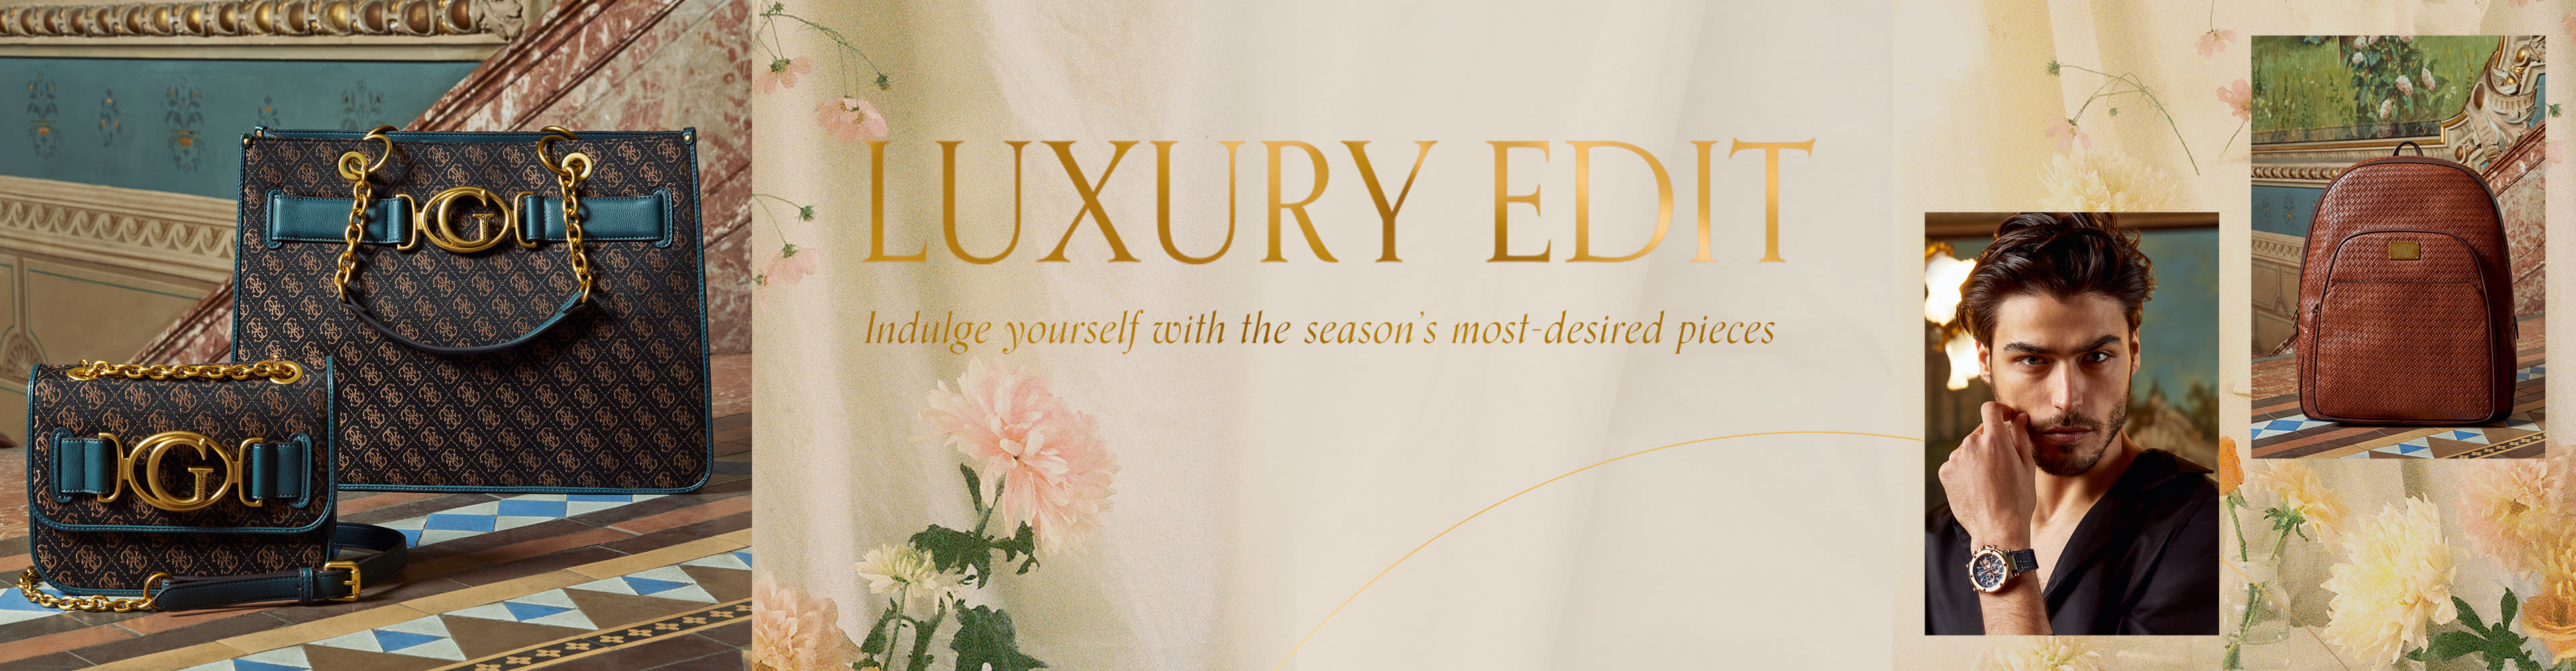 Luxury Edit Indulge yourself with the season’s most-desired piece